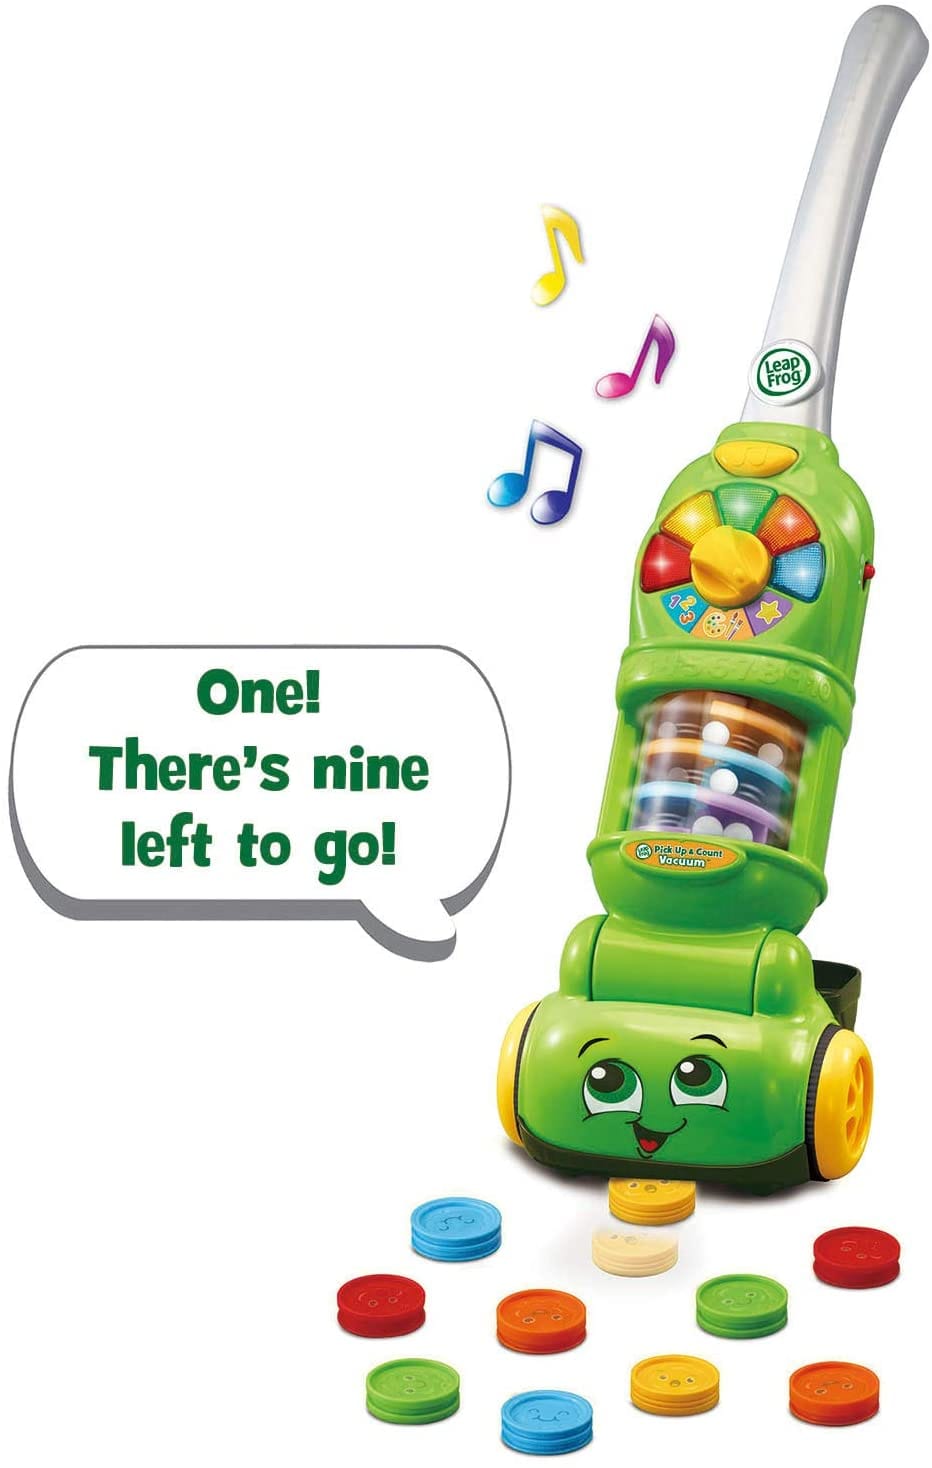 Leap Frog Pick Up & Count Vacuum: his smart toy collects and counts ten pieces of play dust as children spin over them and recognize each color - 611003